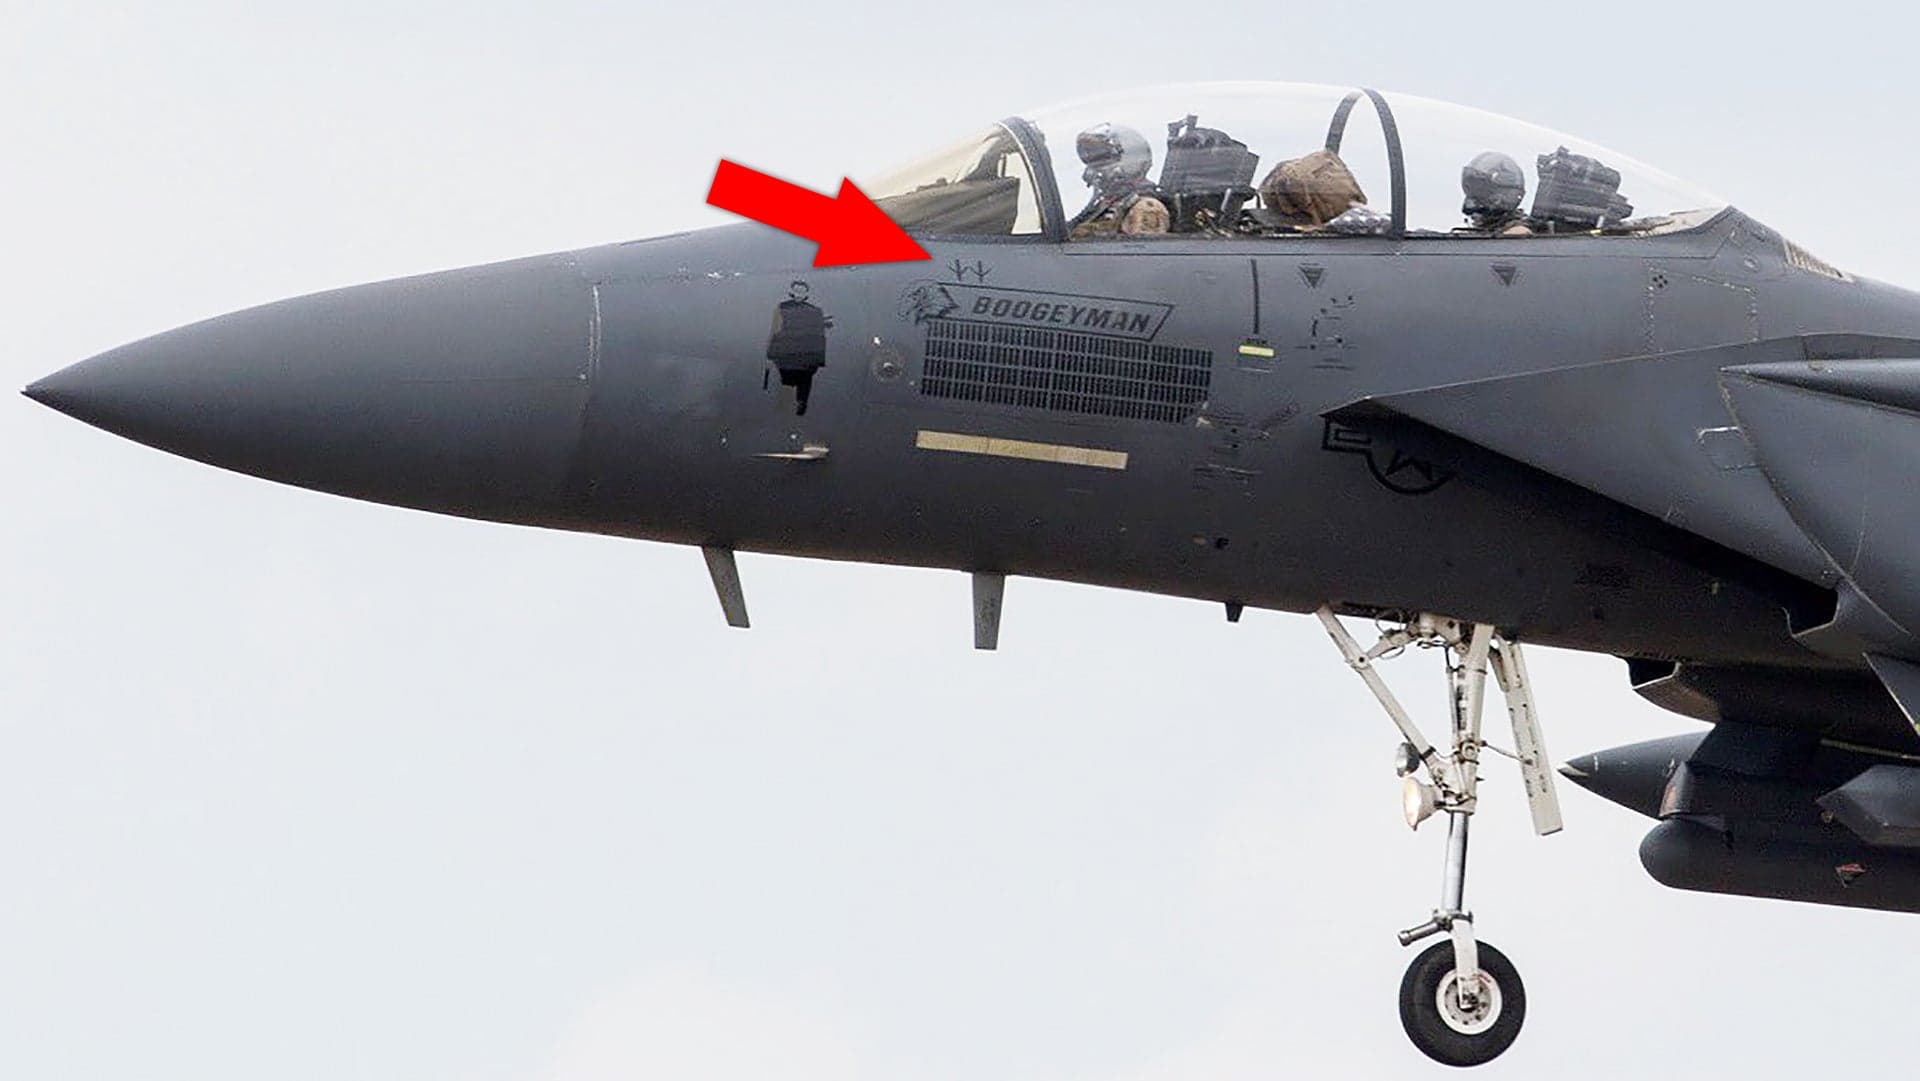 Stealth Missile Marks On F-15Es All But Prove They Dealt Final Blow To Al Baghdadi’s Compound